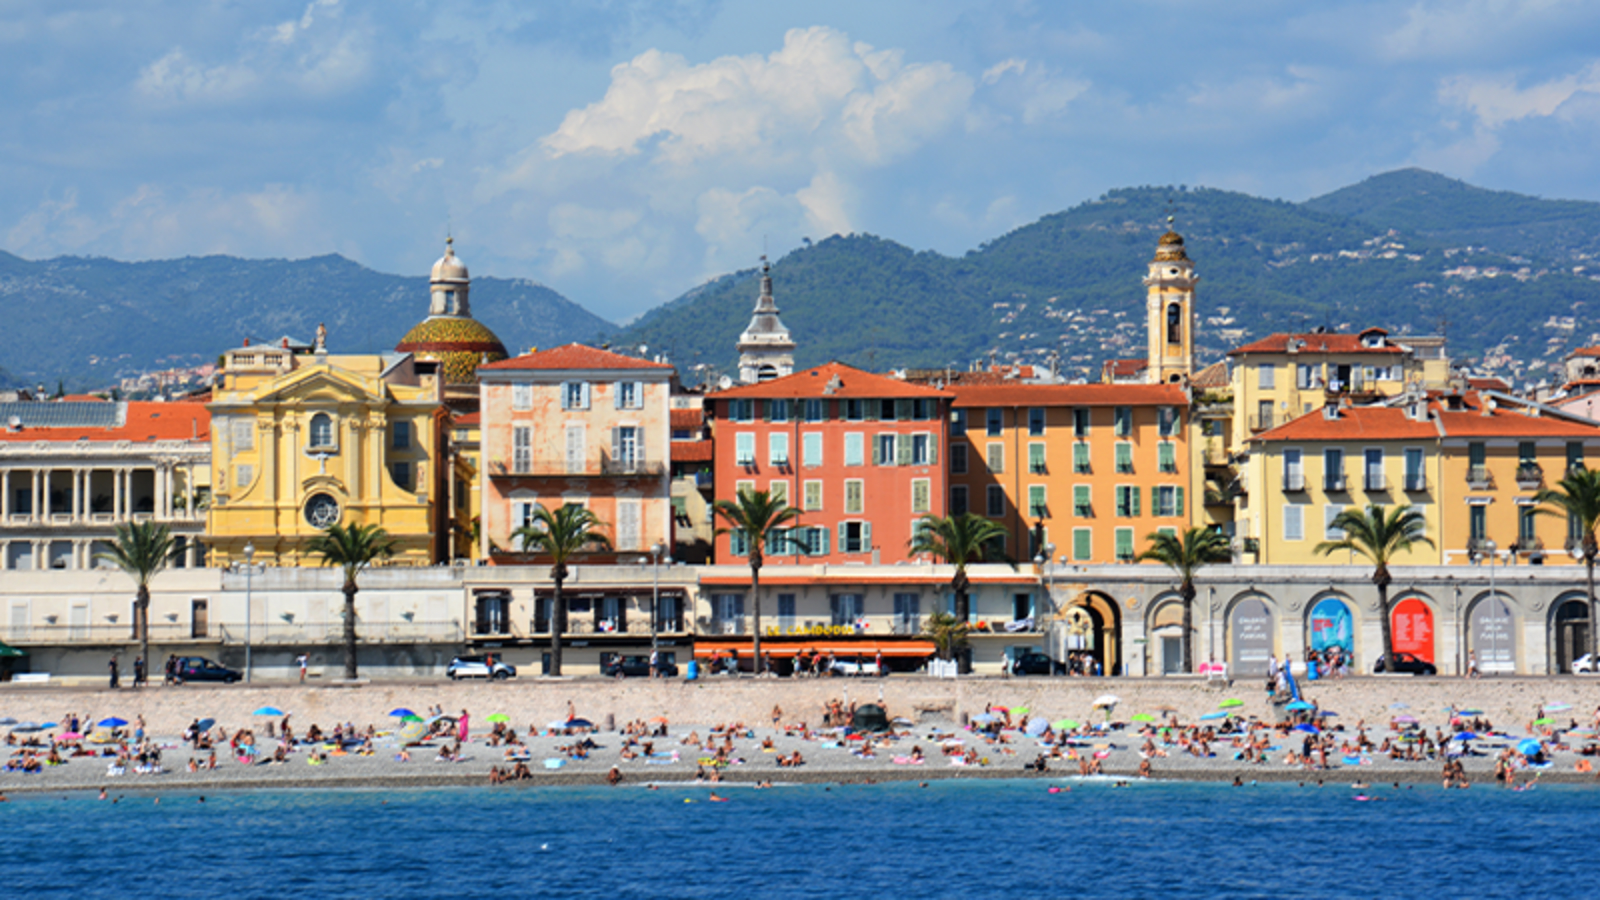 People relaxing and playing on the beach of Nice